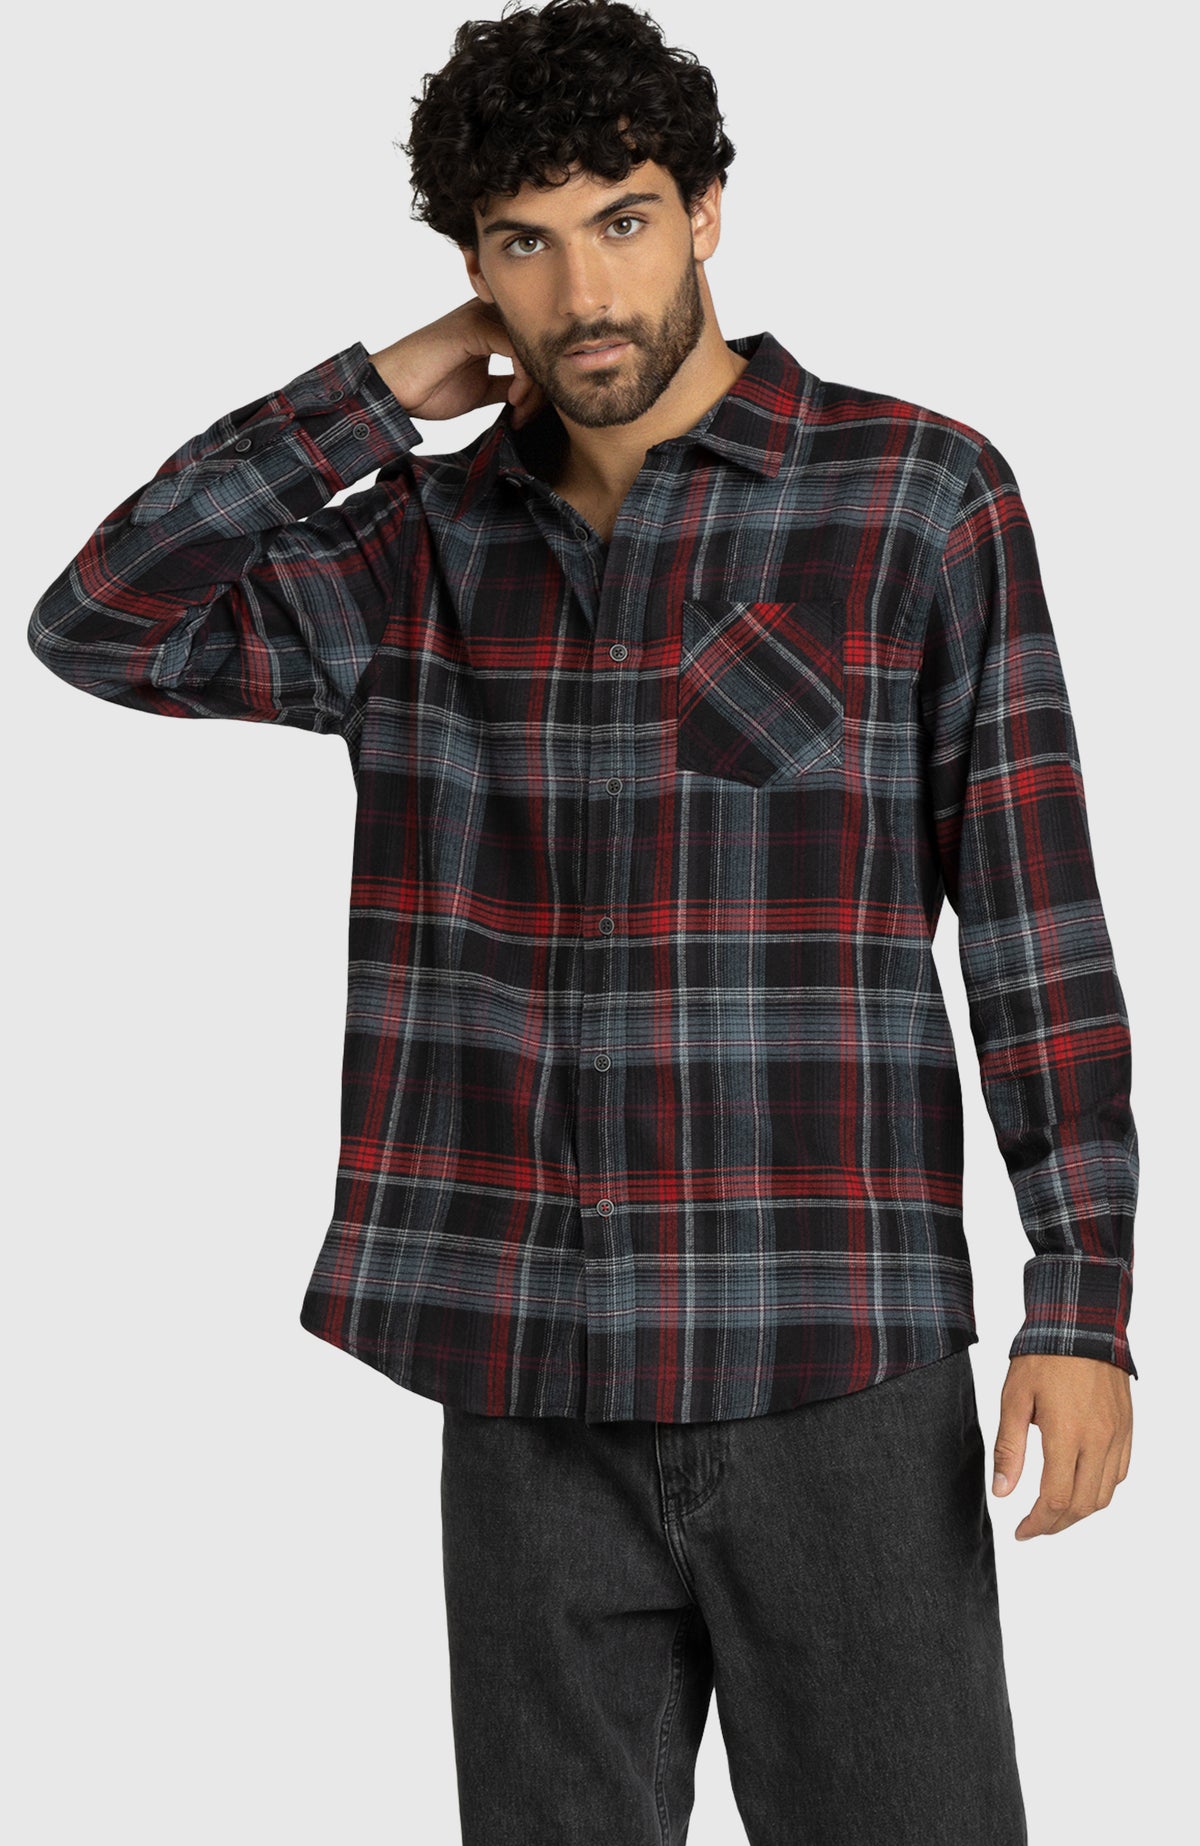 Red and Grey Plaid Flannel Shirt for Men - Front